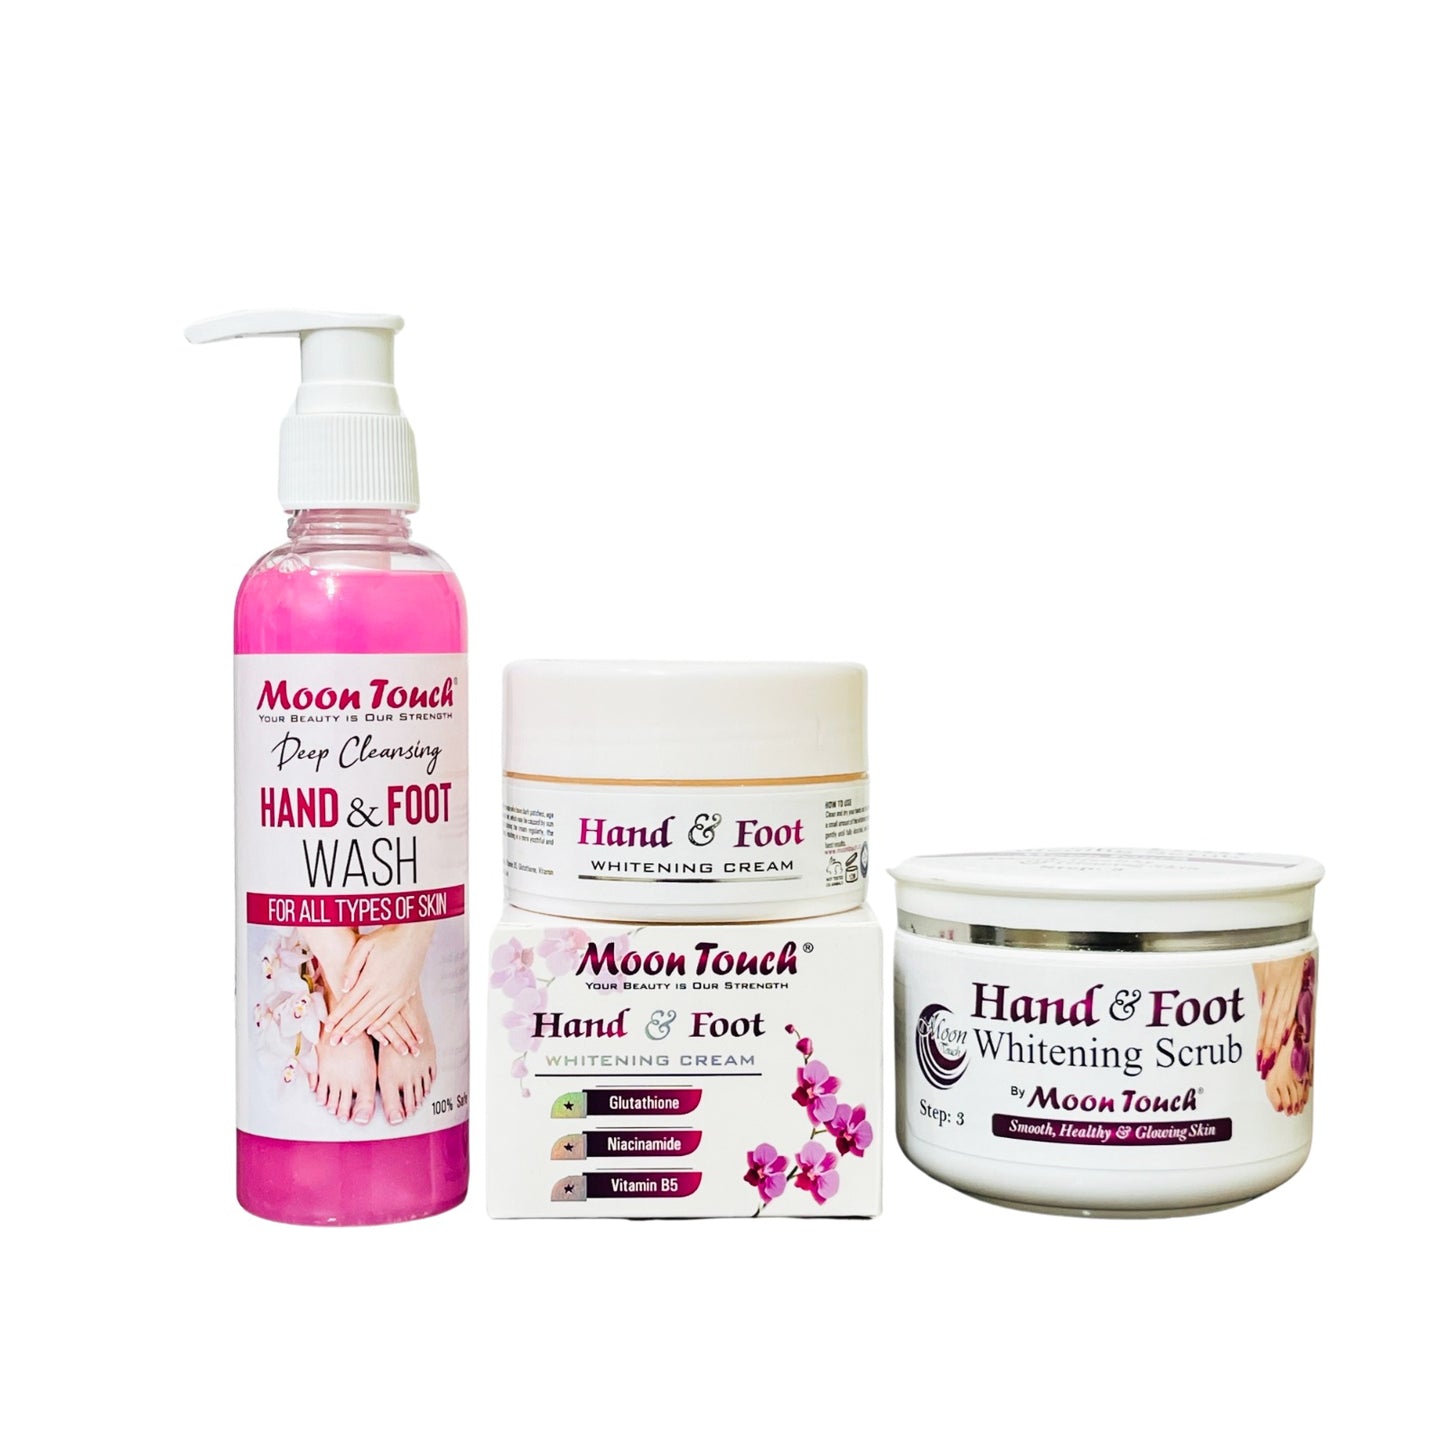 Hand & Foot Care Deal 3 Items